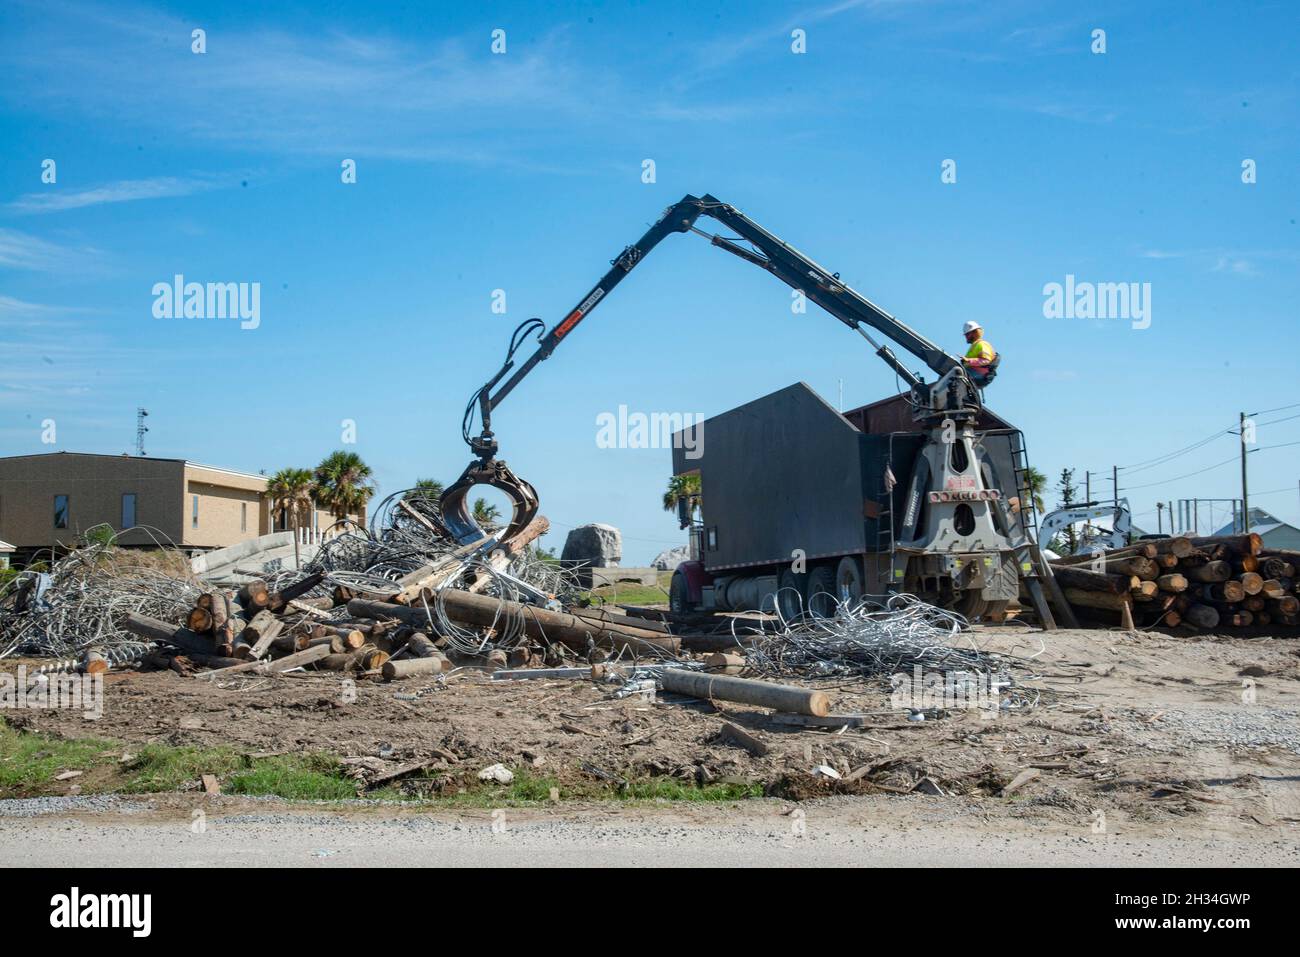 Grand Isle, United States of America. 16 October, 2021. FEMA workers assist with debris removal from homes and properties in the aftermath of Hurricane Ida weeks after the devastating Category 4 storm struck the region October 16, 2021 in Grand Isle, Louisiana.  Credit: Patsy Lynch/FEMA/Alamy Live News Stock Photo